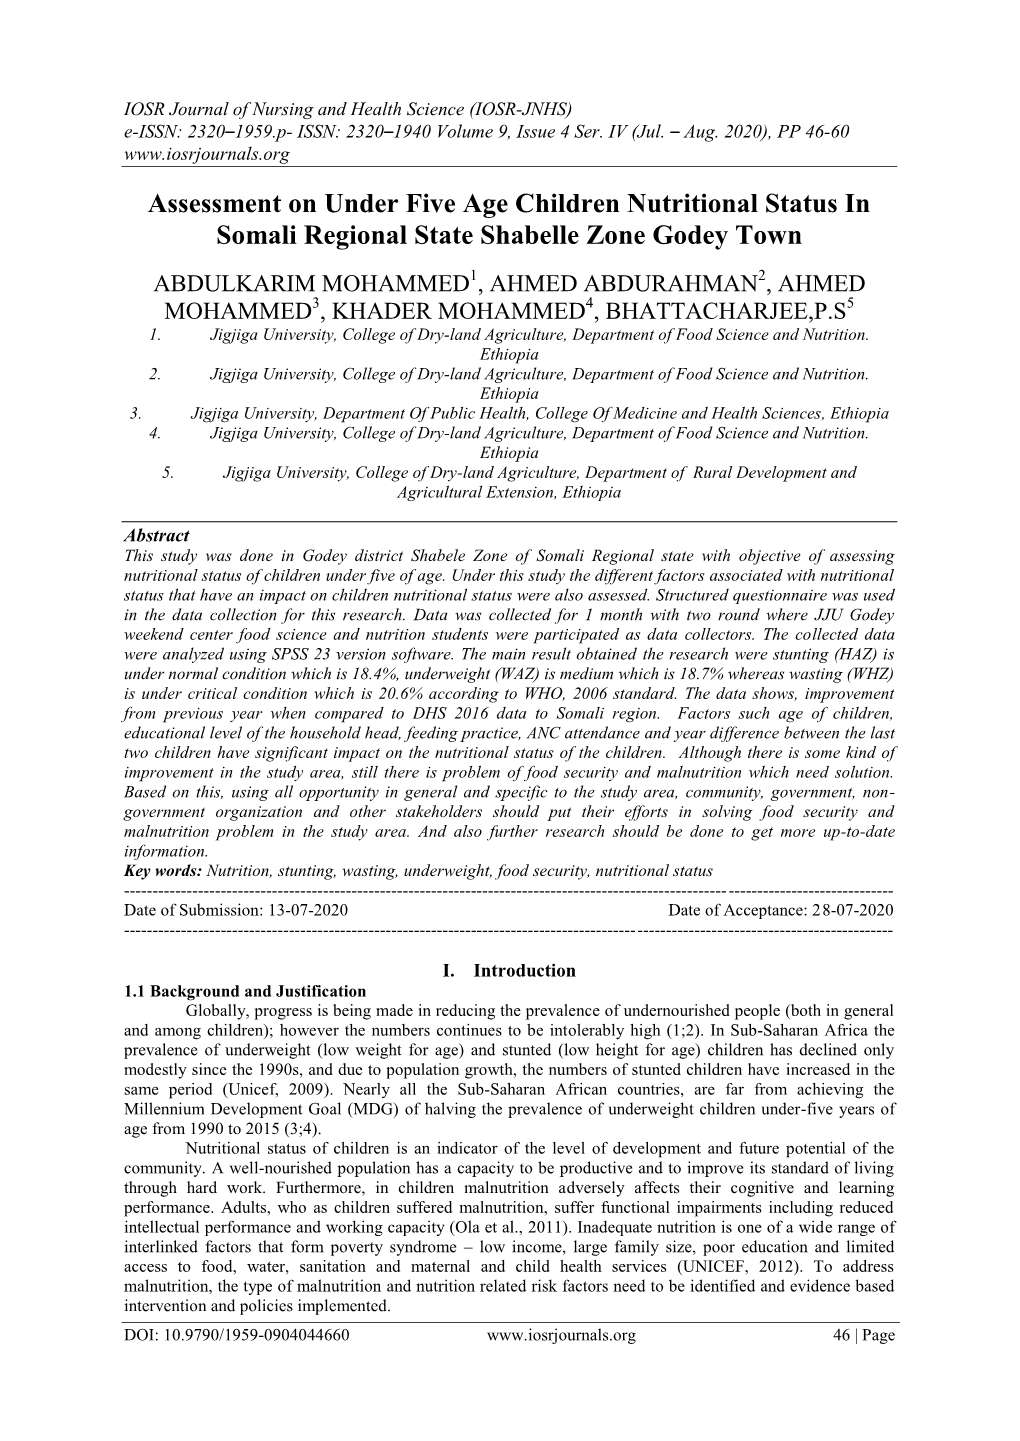 Assessment on Under Five Age Children Nutritional Status in Somali Regional State Shabelle Zone Godey Town